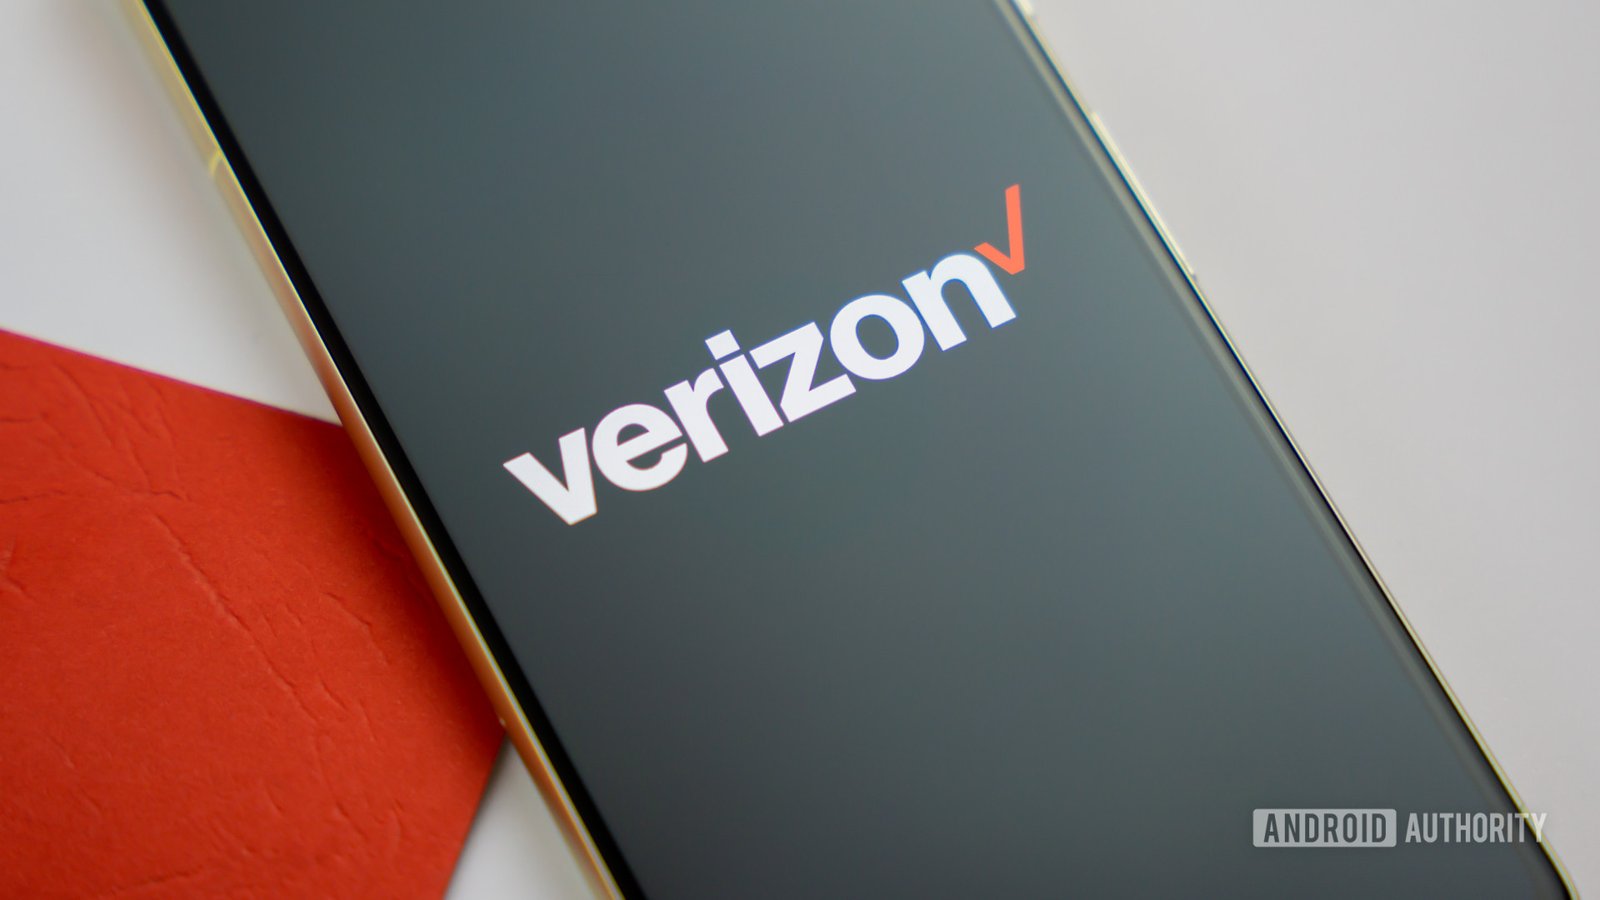 Verizon will keep charging frivolous monthly fee even after $100 million settlement payout –